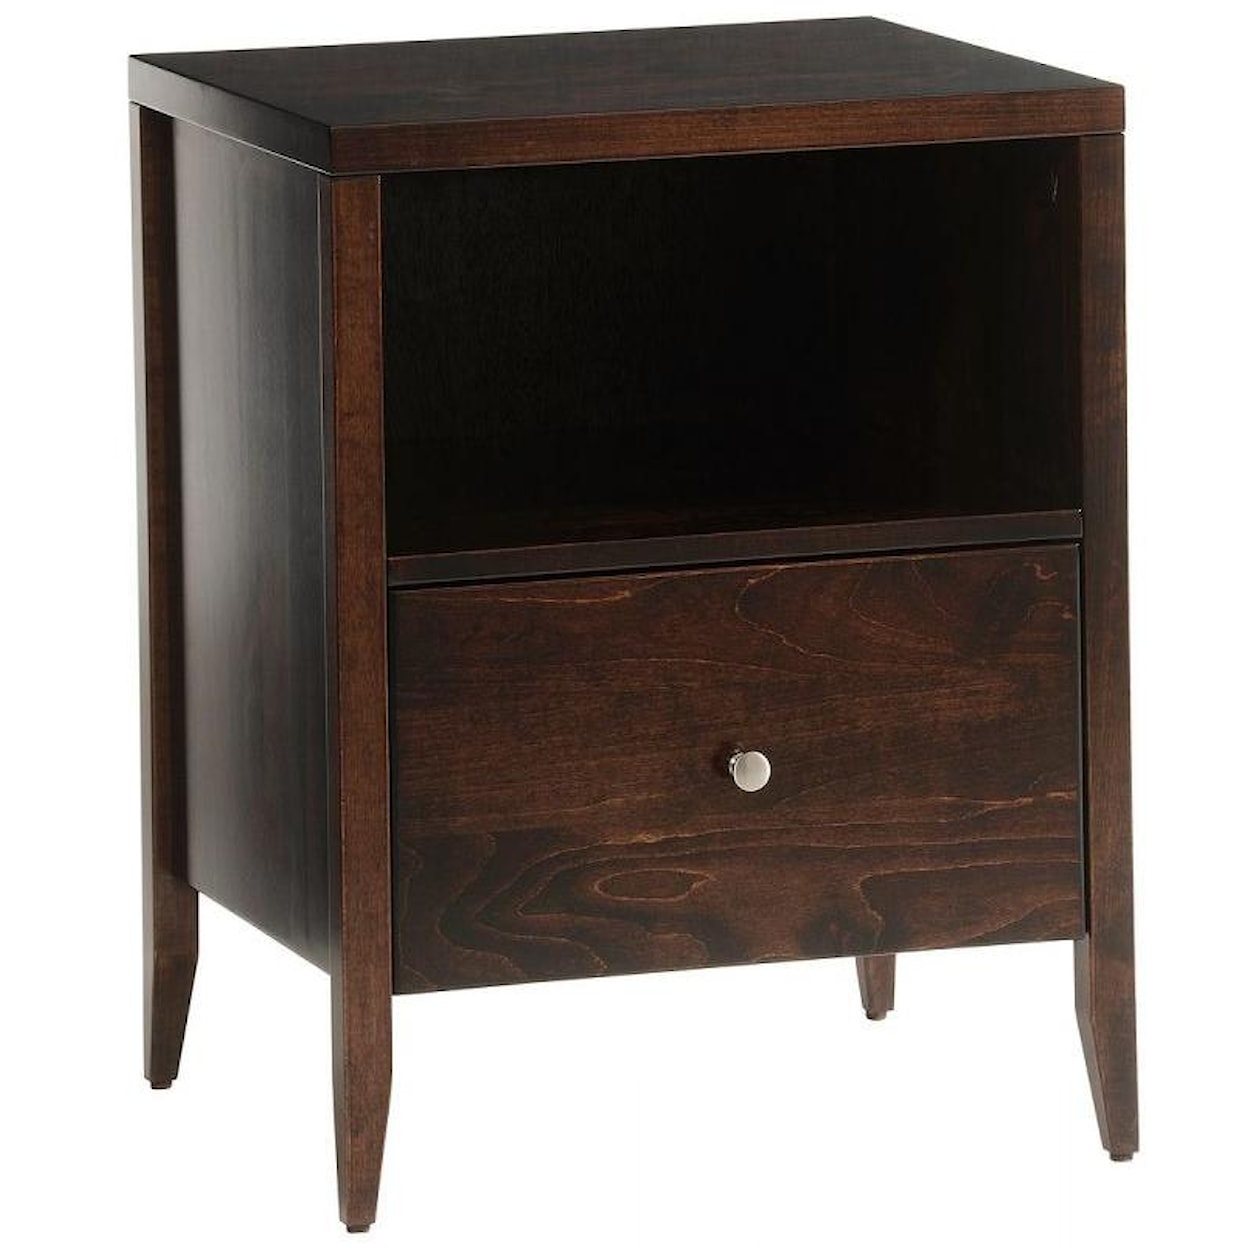 Canal Dover Furniture Renaissance Bedroom Drawer Nightstand